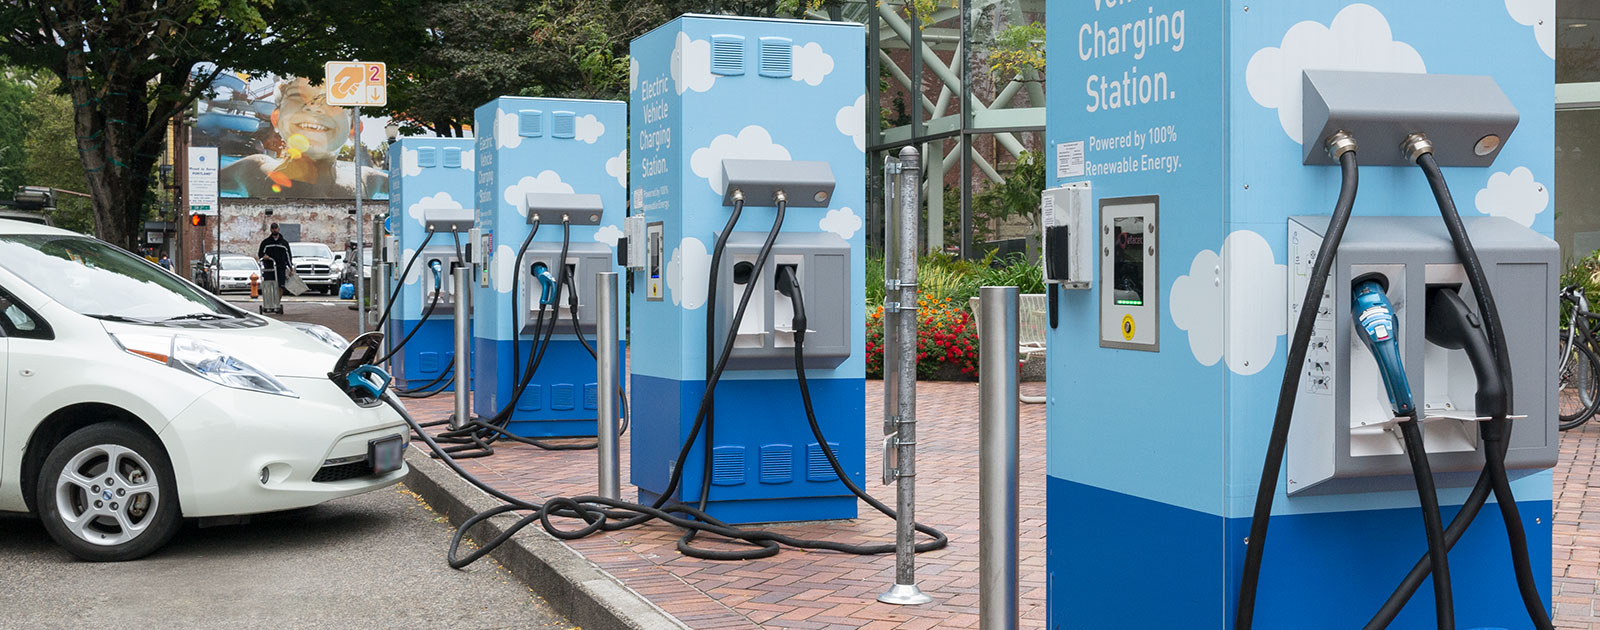 PGE & Milwaukie Partner to Expand Electric Vehicle Charging City of